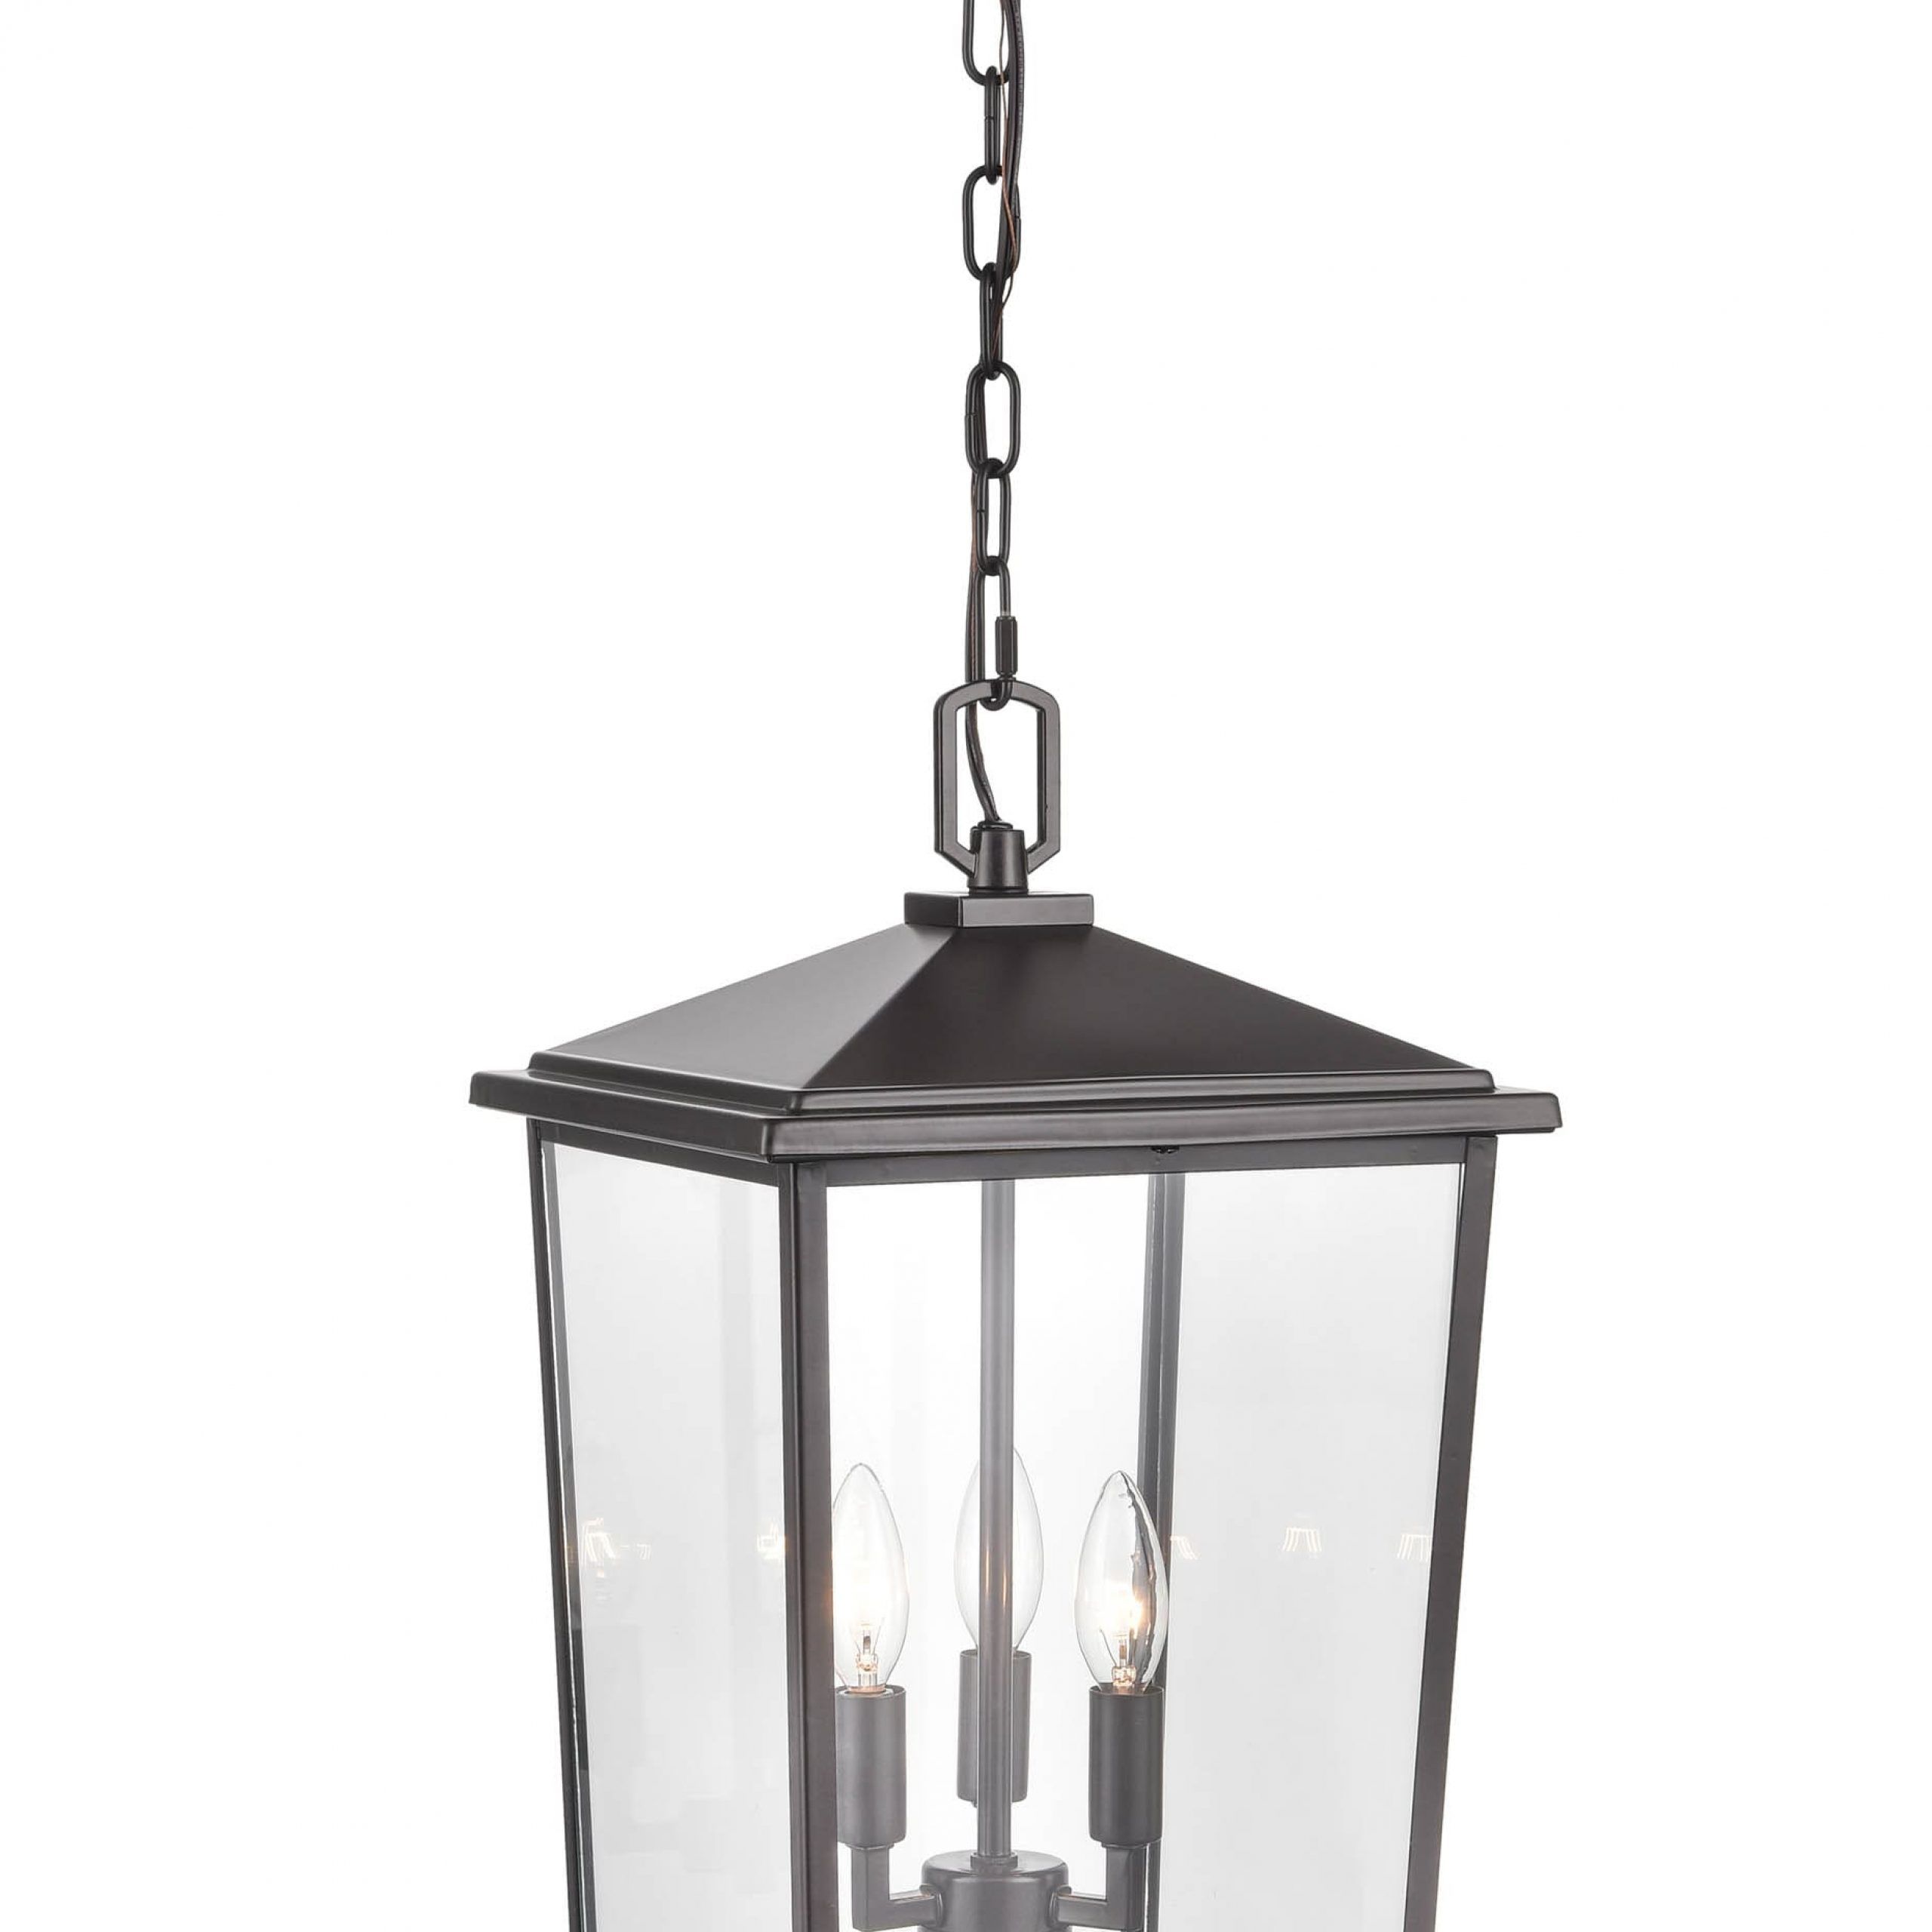 Millennium Lighting Fetterton 3 Light Powder Coat Bronze Transitional Clear  Glass Lantern Outdoor Pendant Light In The Pendant Lighting Department At  Lowes For Current White Powder Coat Lantern Chandeliers (View 3 of 15)